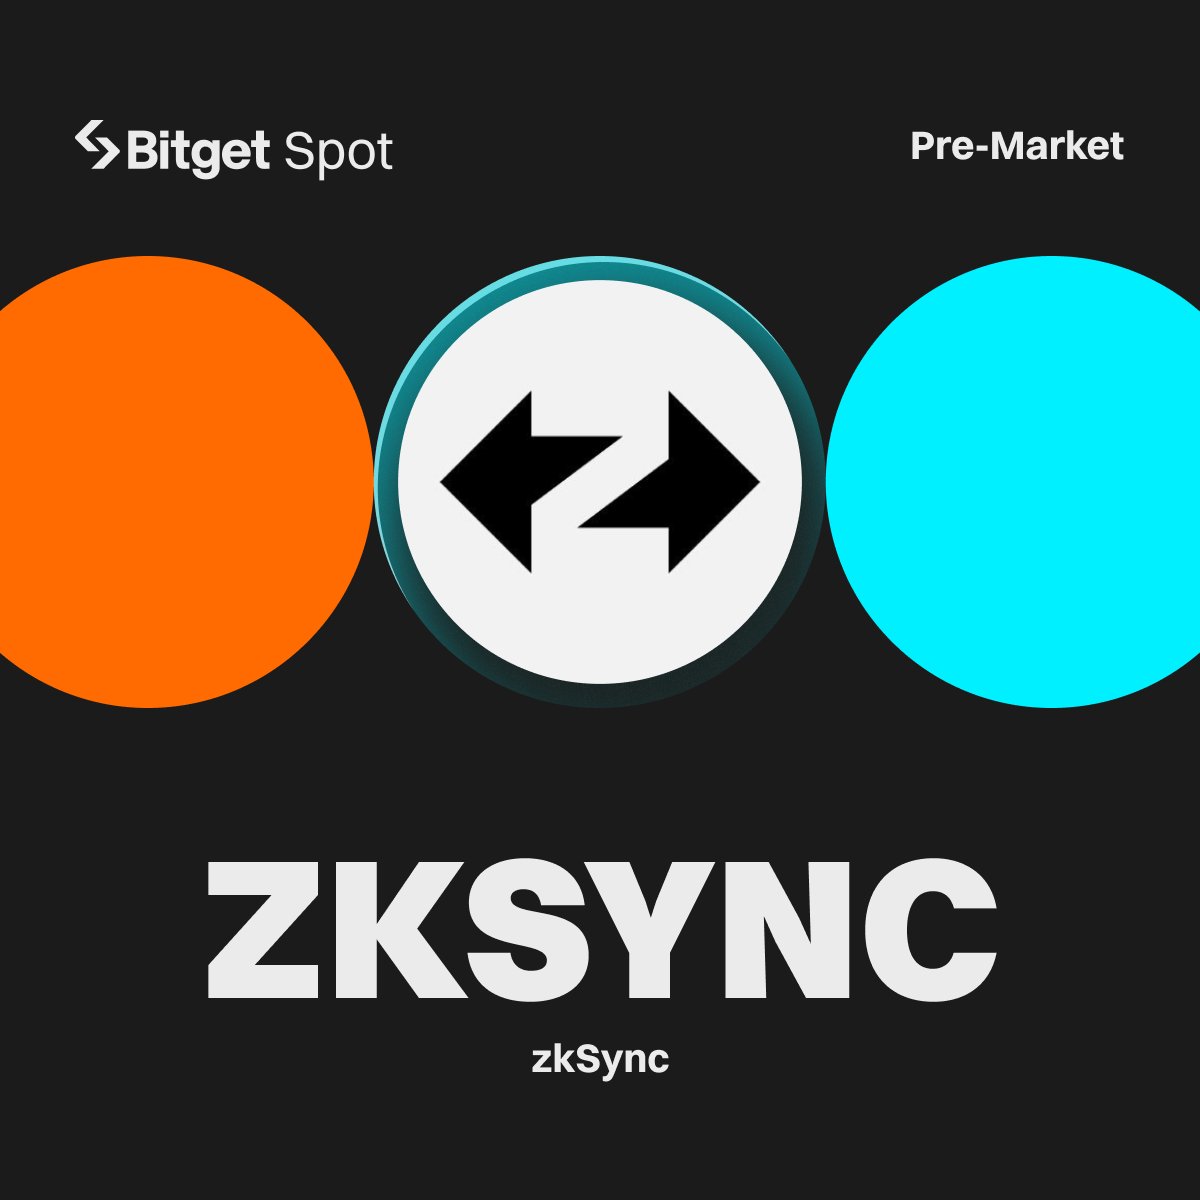 🔥 Get Ready for @zkSync ($ZKSYNC): The Future of Ethereum Scaling! 🔥

Say hello to *#zkSync*, the game-changing Ethereum Layer 2 solution that promises blazing-fast, ultra-low-cost, and highly secure transactions with cutting-edge zero-knowledge-proof technology.

*Highlights:*